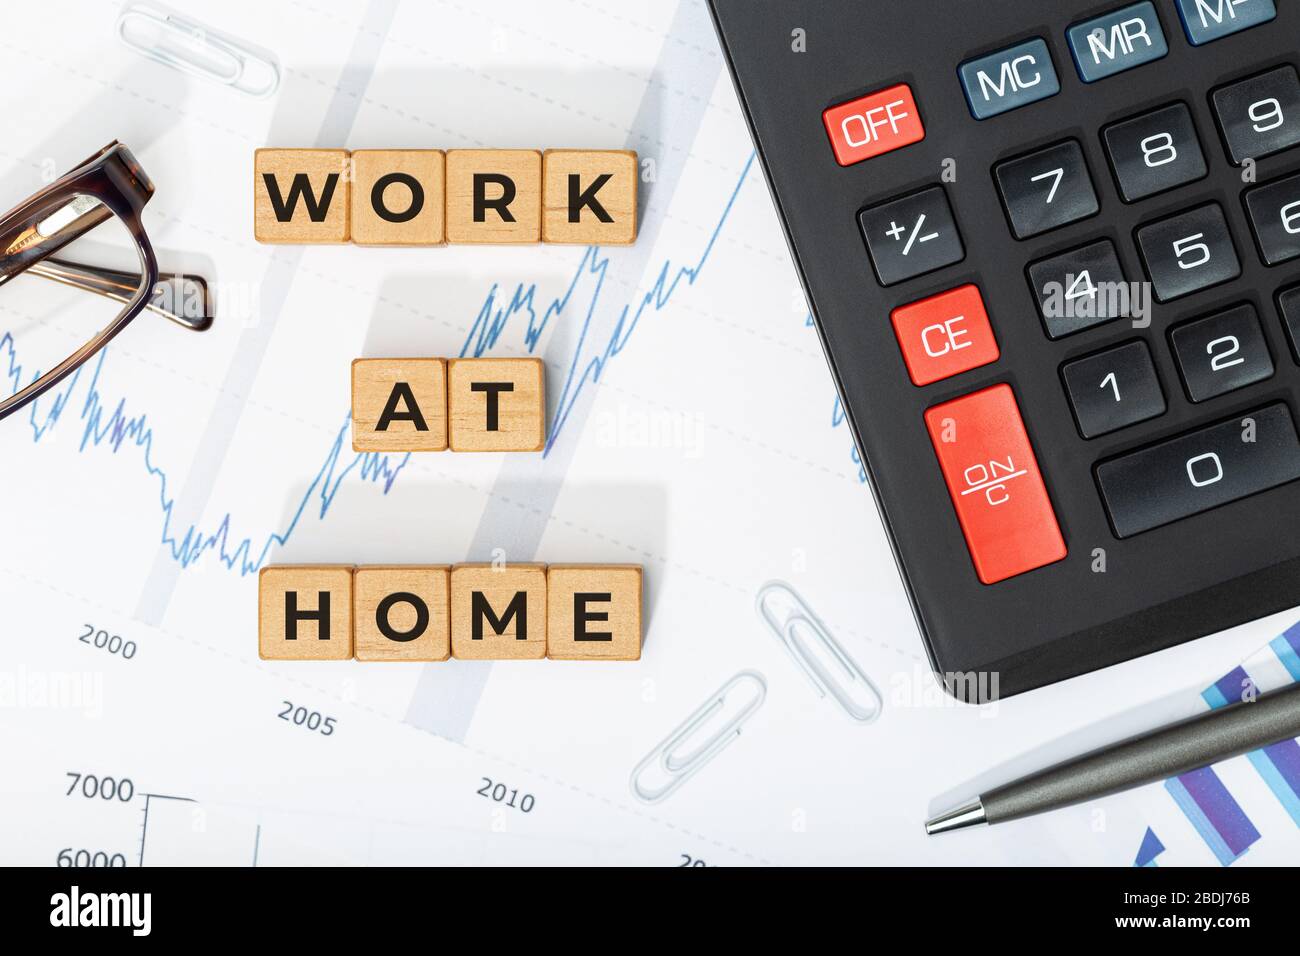 Work at home concept. Wooden blocks with phrase, calculator and printed charts. Business background Stock Photo